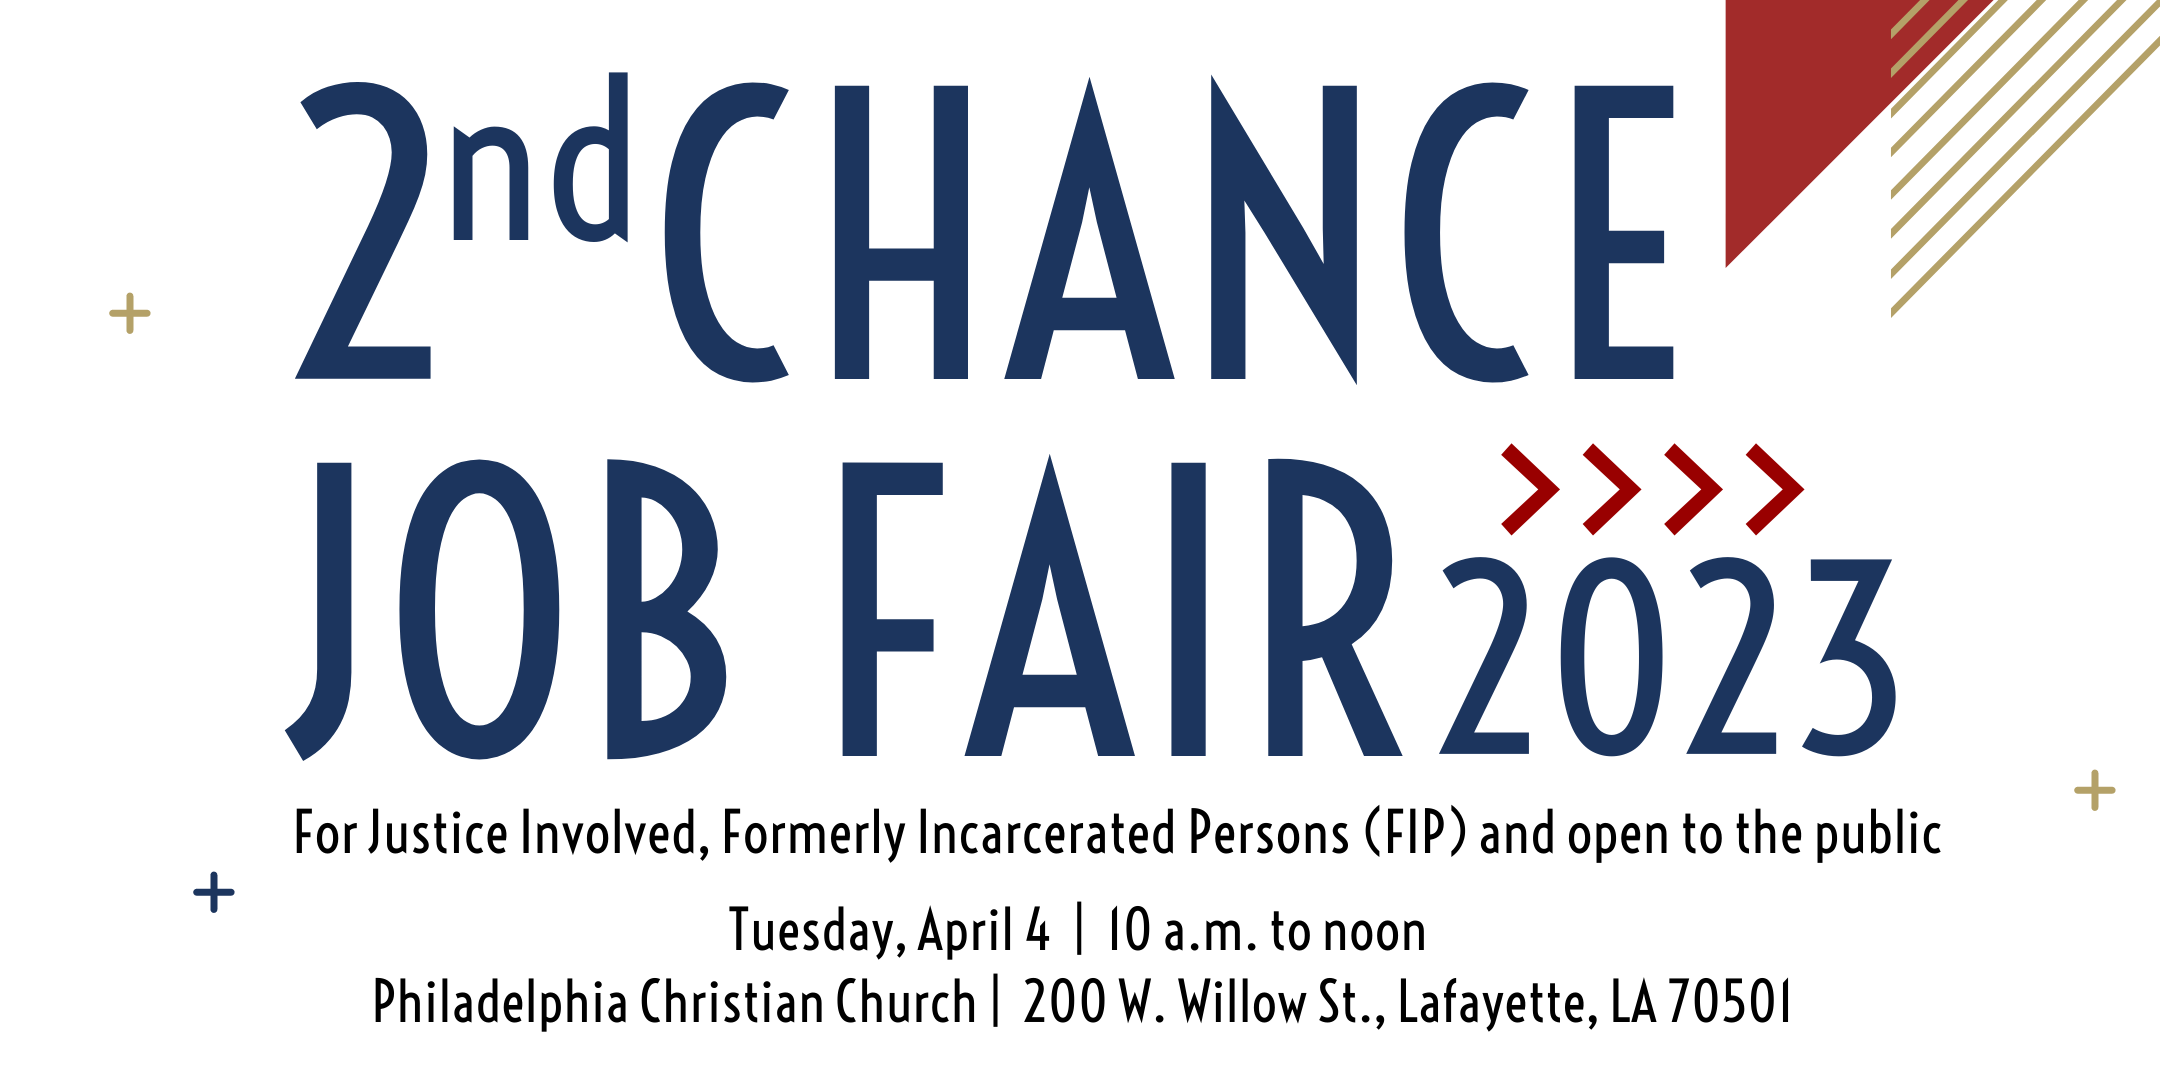 Image for 2nd Chance Job Fair